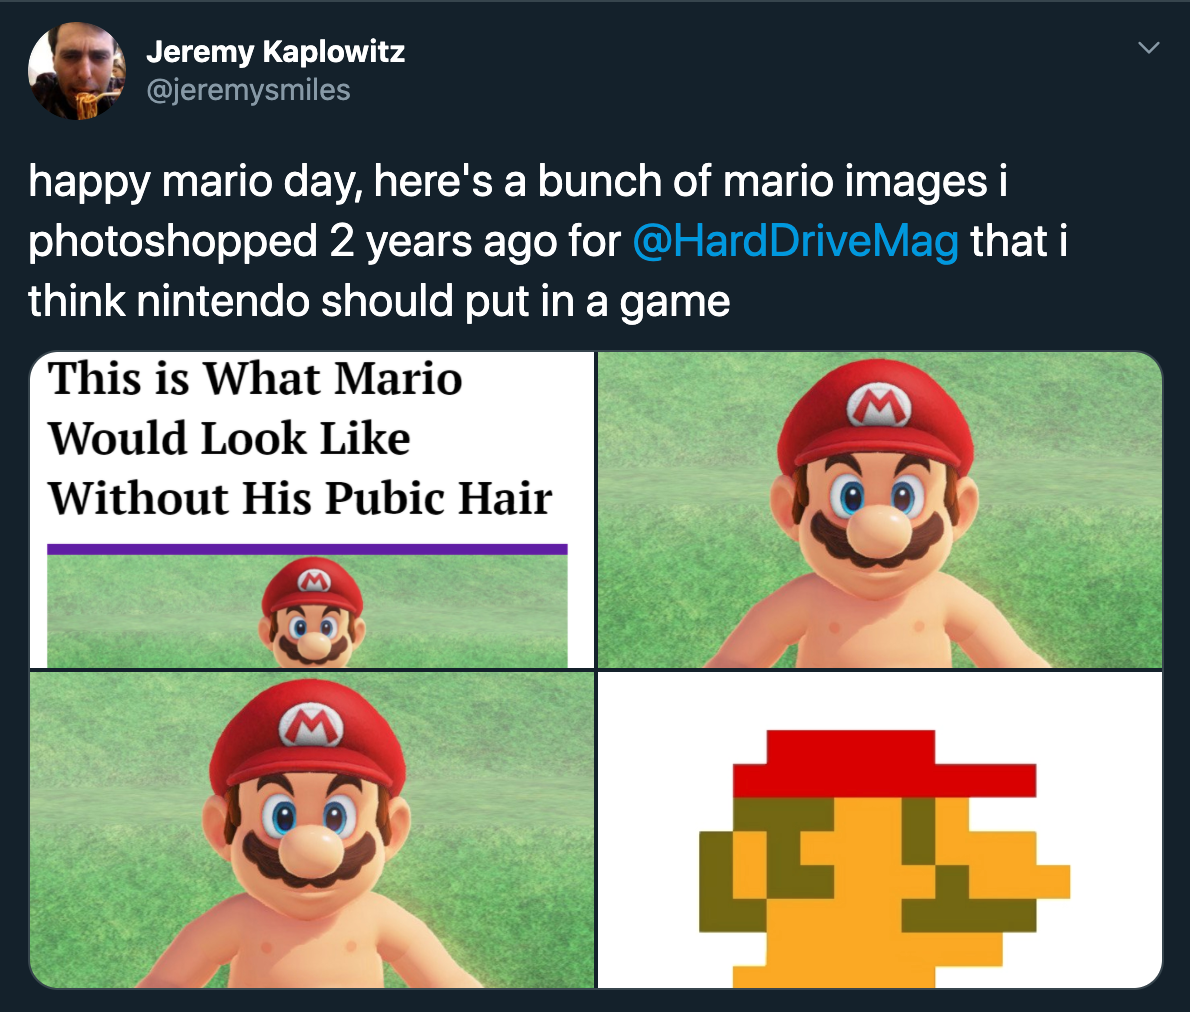 happy mario day, here's a bunch of mario images i photoshopped 2 years ago for DriveMag that i think nintendo should put in a game This is What Mario Would Look Without His Pubic Hair